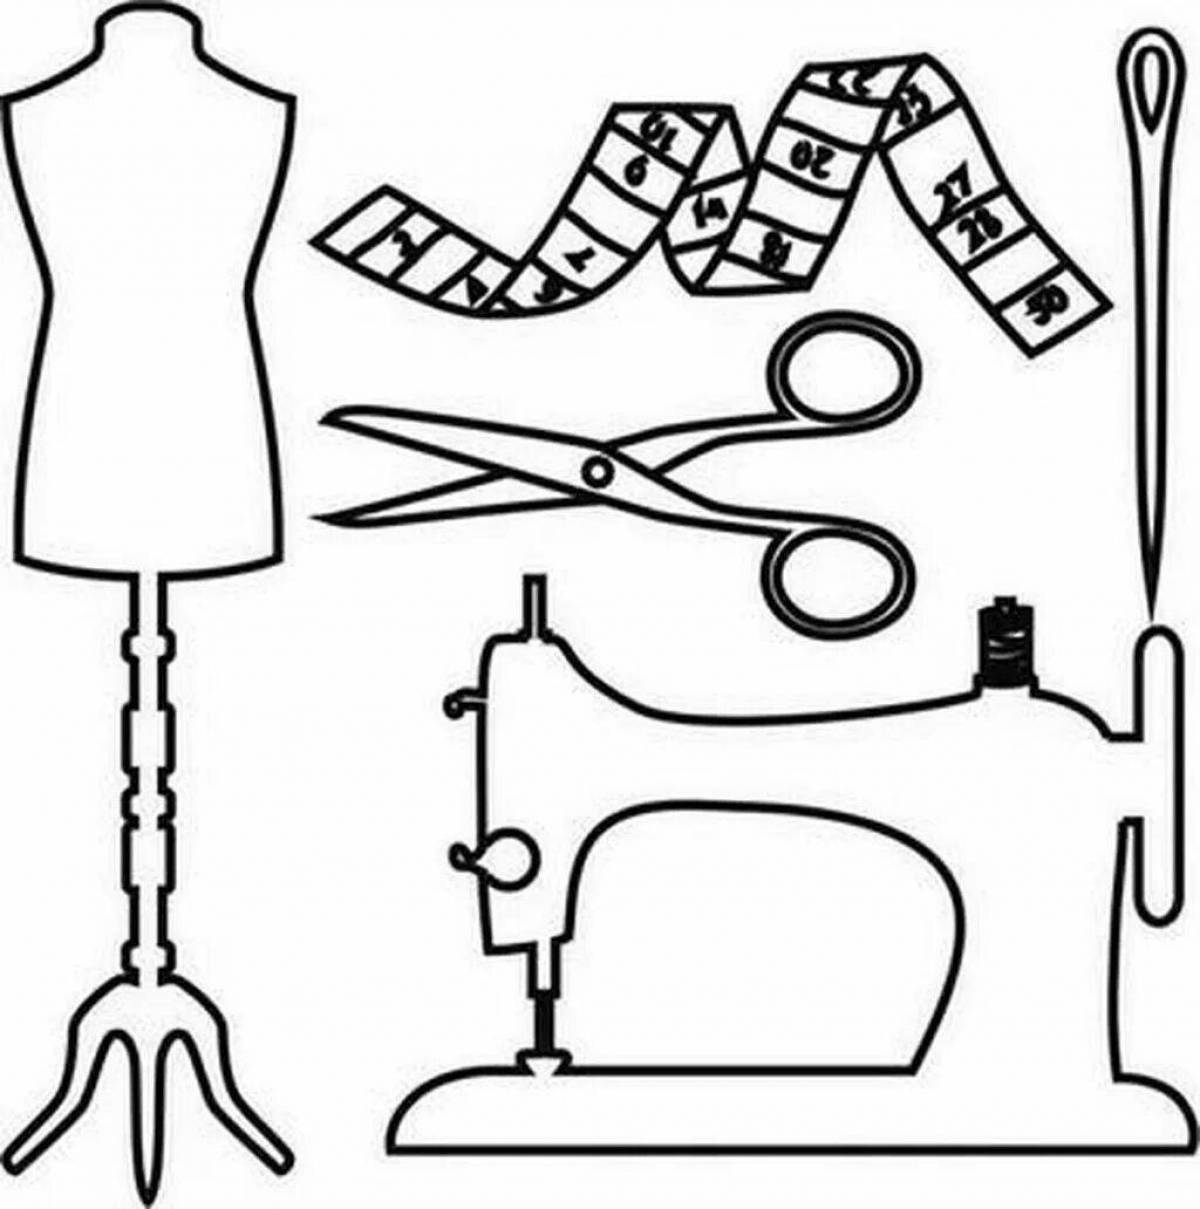 Colorful seamstress coloring page for kids